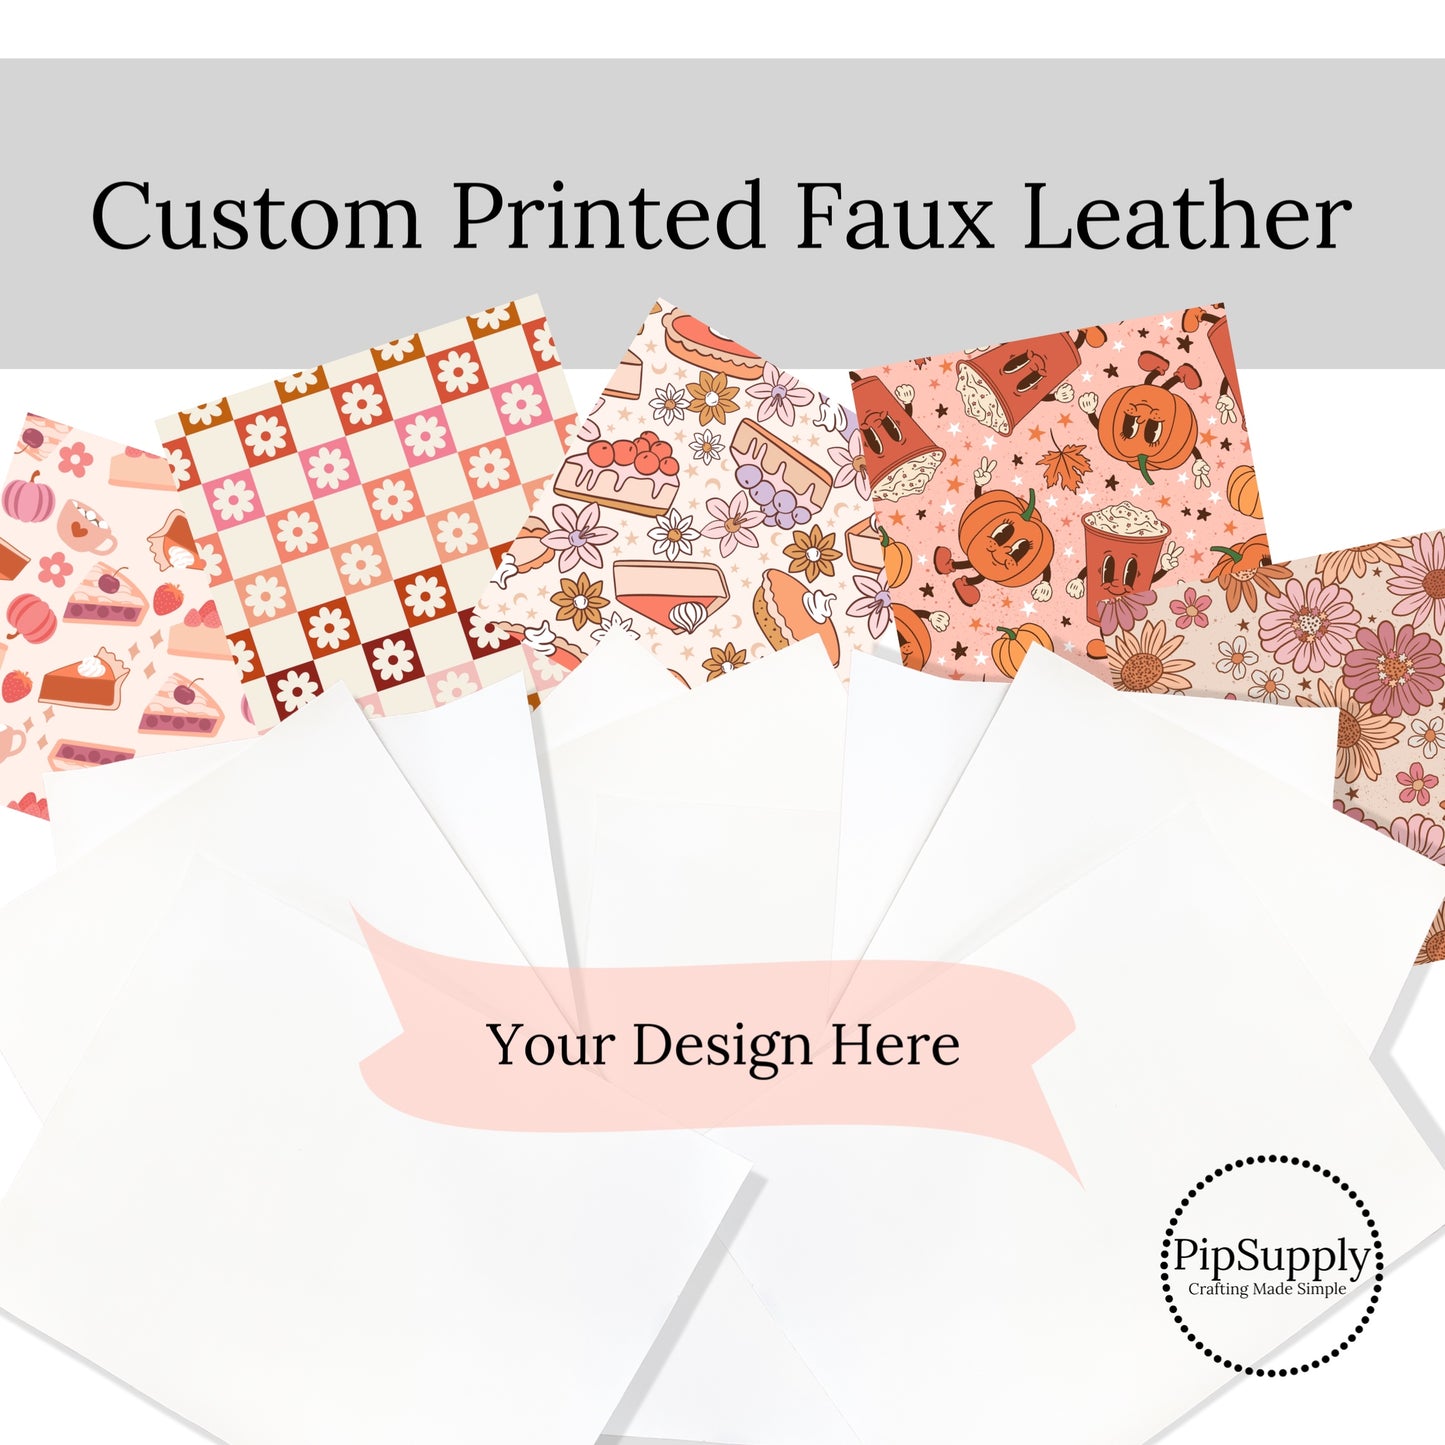 Custom Printed Faux Leather Sheets - Upload Your Design/Pattern